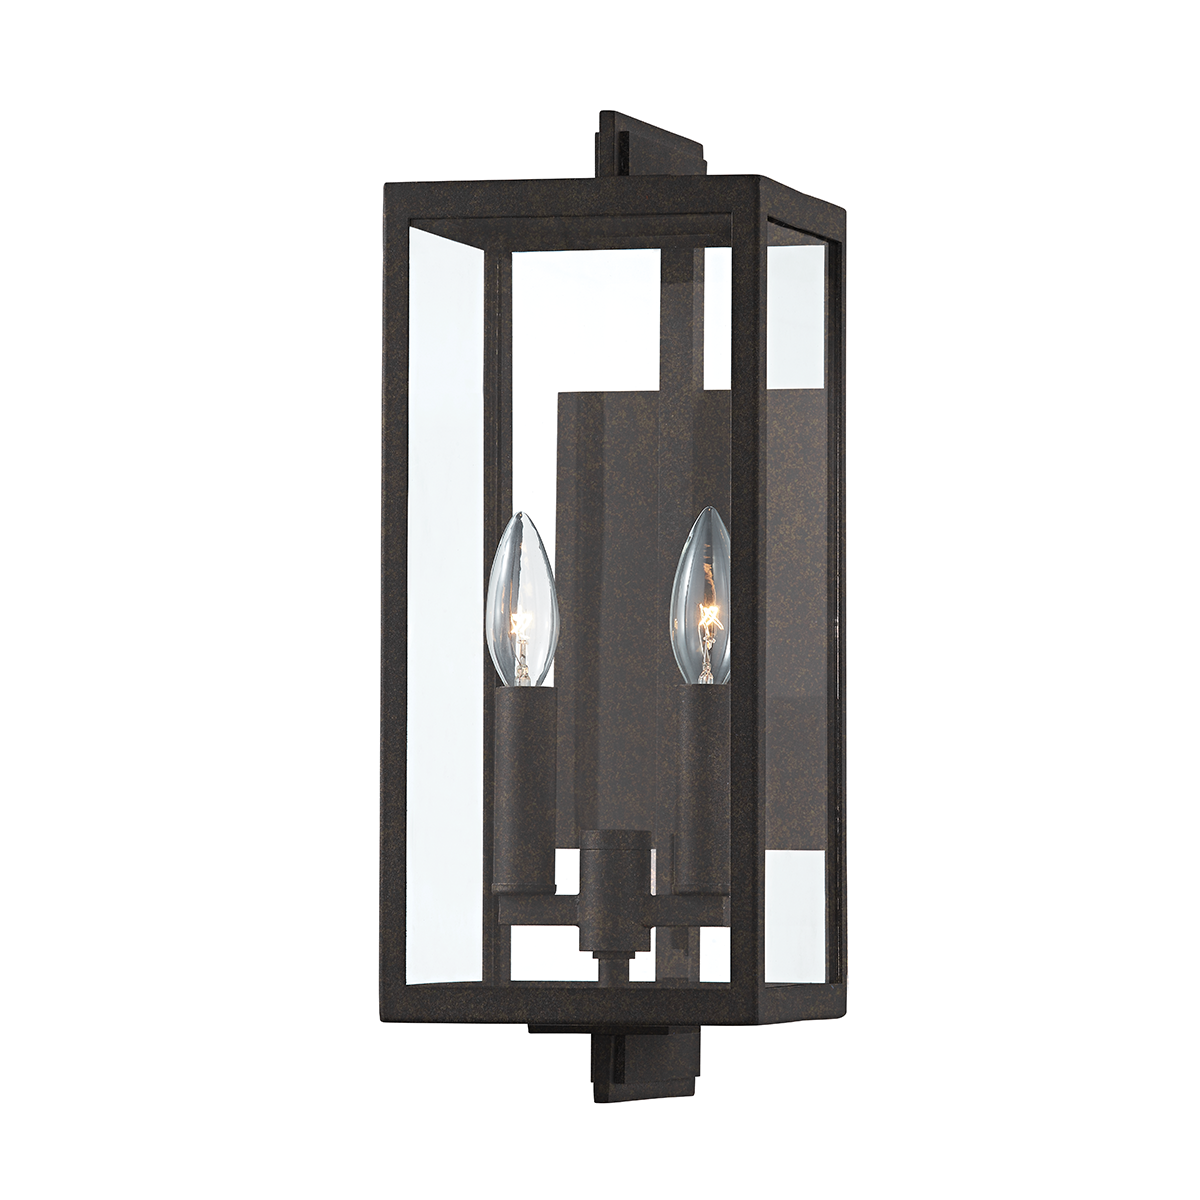 Troy NICO 2 LIGHT EXTERIOR WALL SCONCE B5512 Outdoor l Wall Troy Lighting   